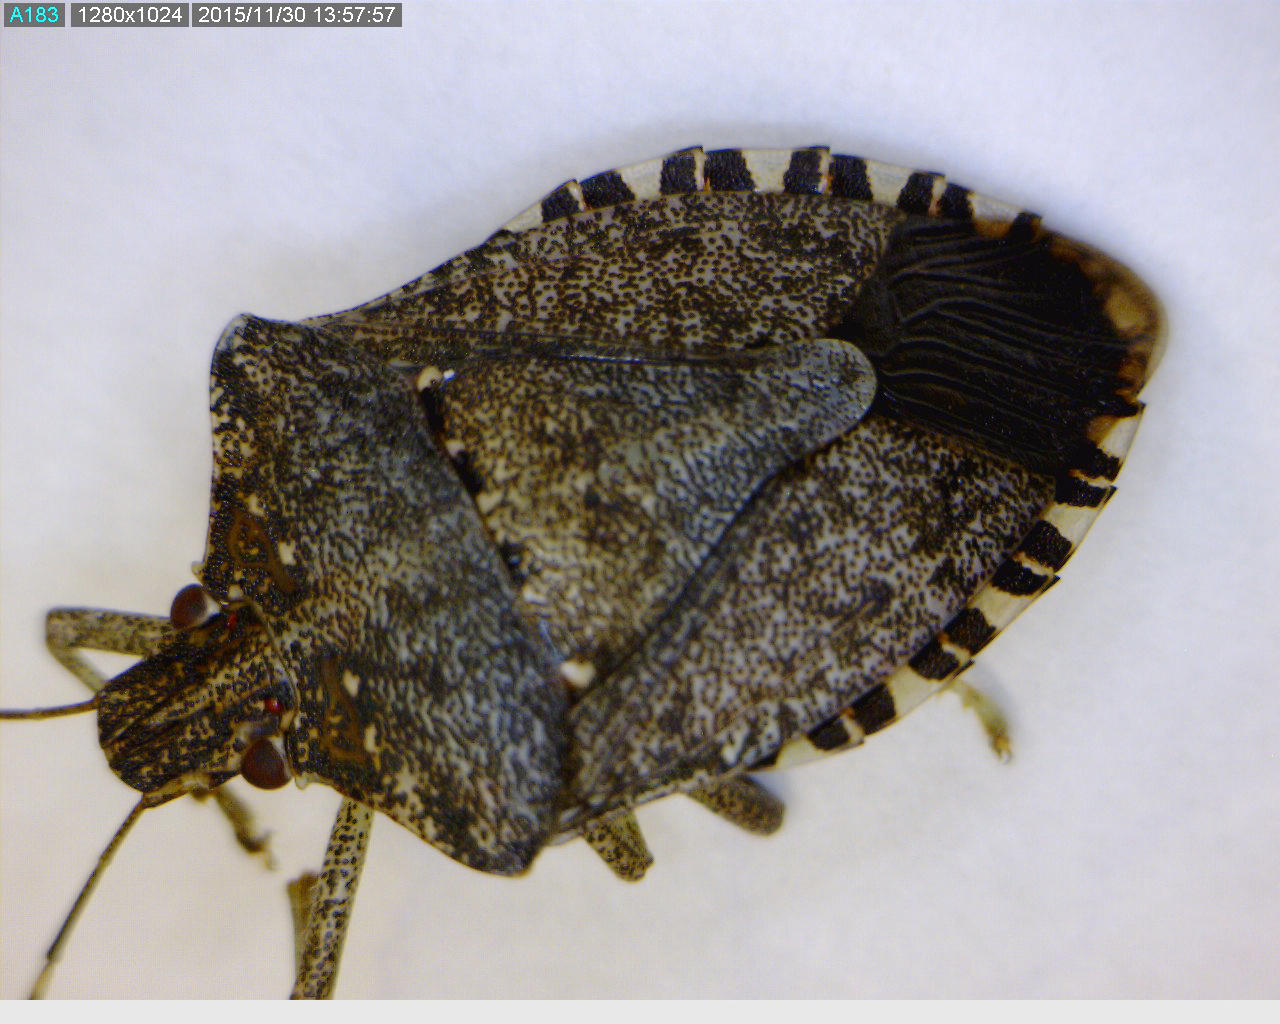 Three or four key characteristics are used to distinguish the brown marmorated stink bug (BMSB) from other stink bugs found in the Pacific Northwest: 1) white bands on the brown antennae, 2) bands on the dorsal (top) side of the peripheral margin of the abdomen, 3) smooth leading edge of the prothorax (shoulders), 4) gem-encrusted prothorax just behind the head (on both the dorsal and ventral side).